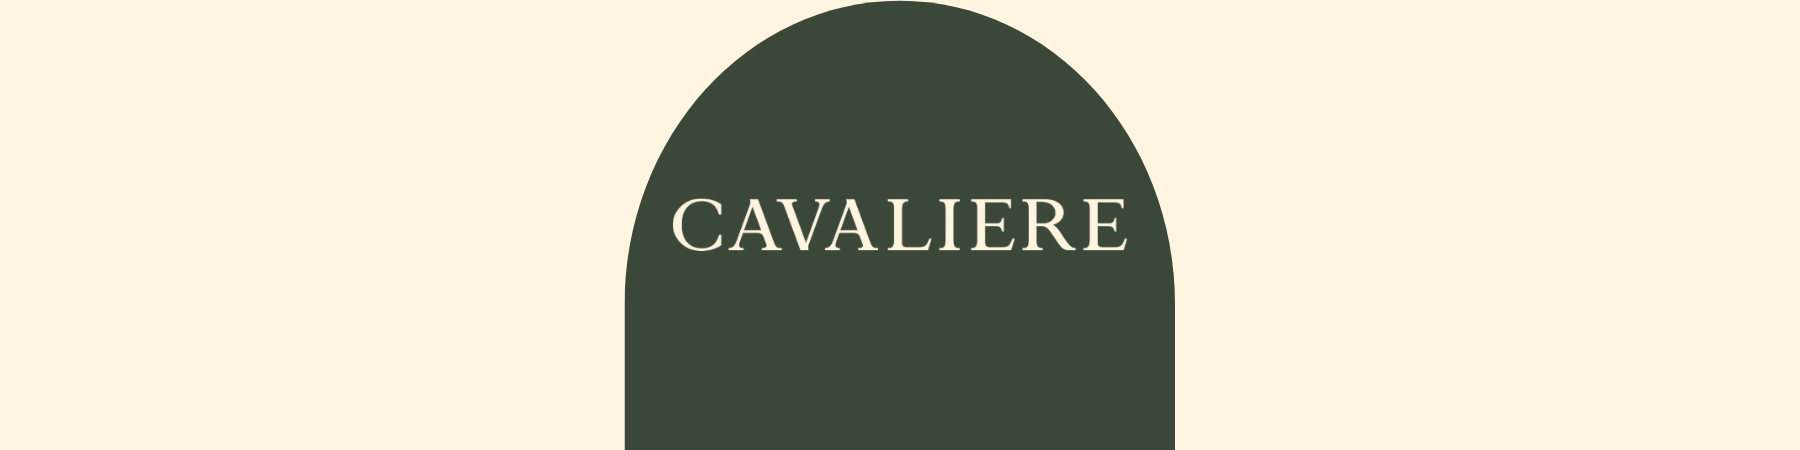 Cavaliere at the local merchants